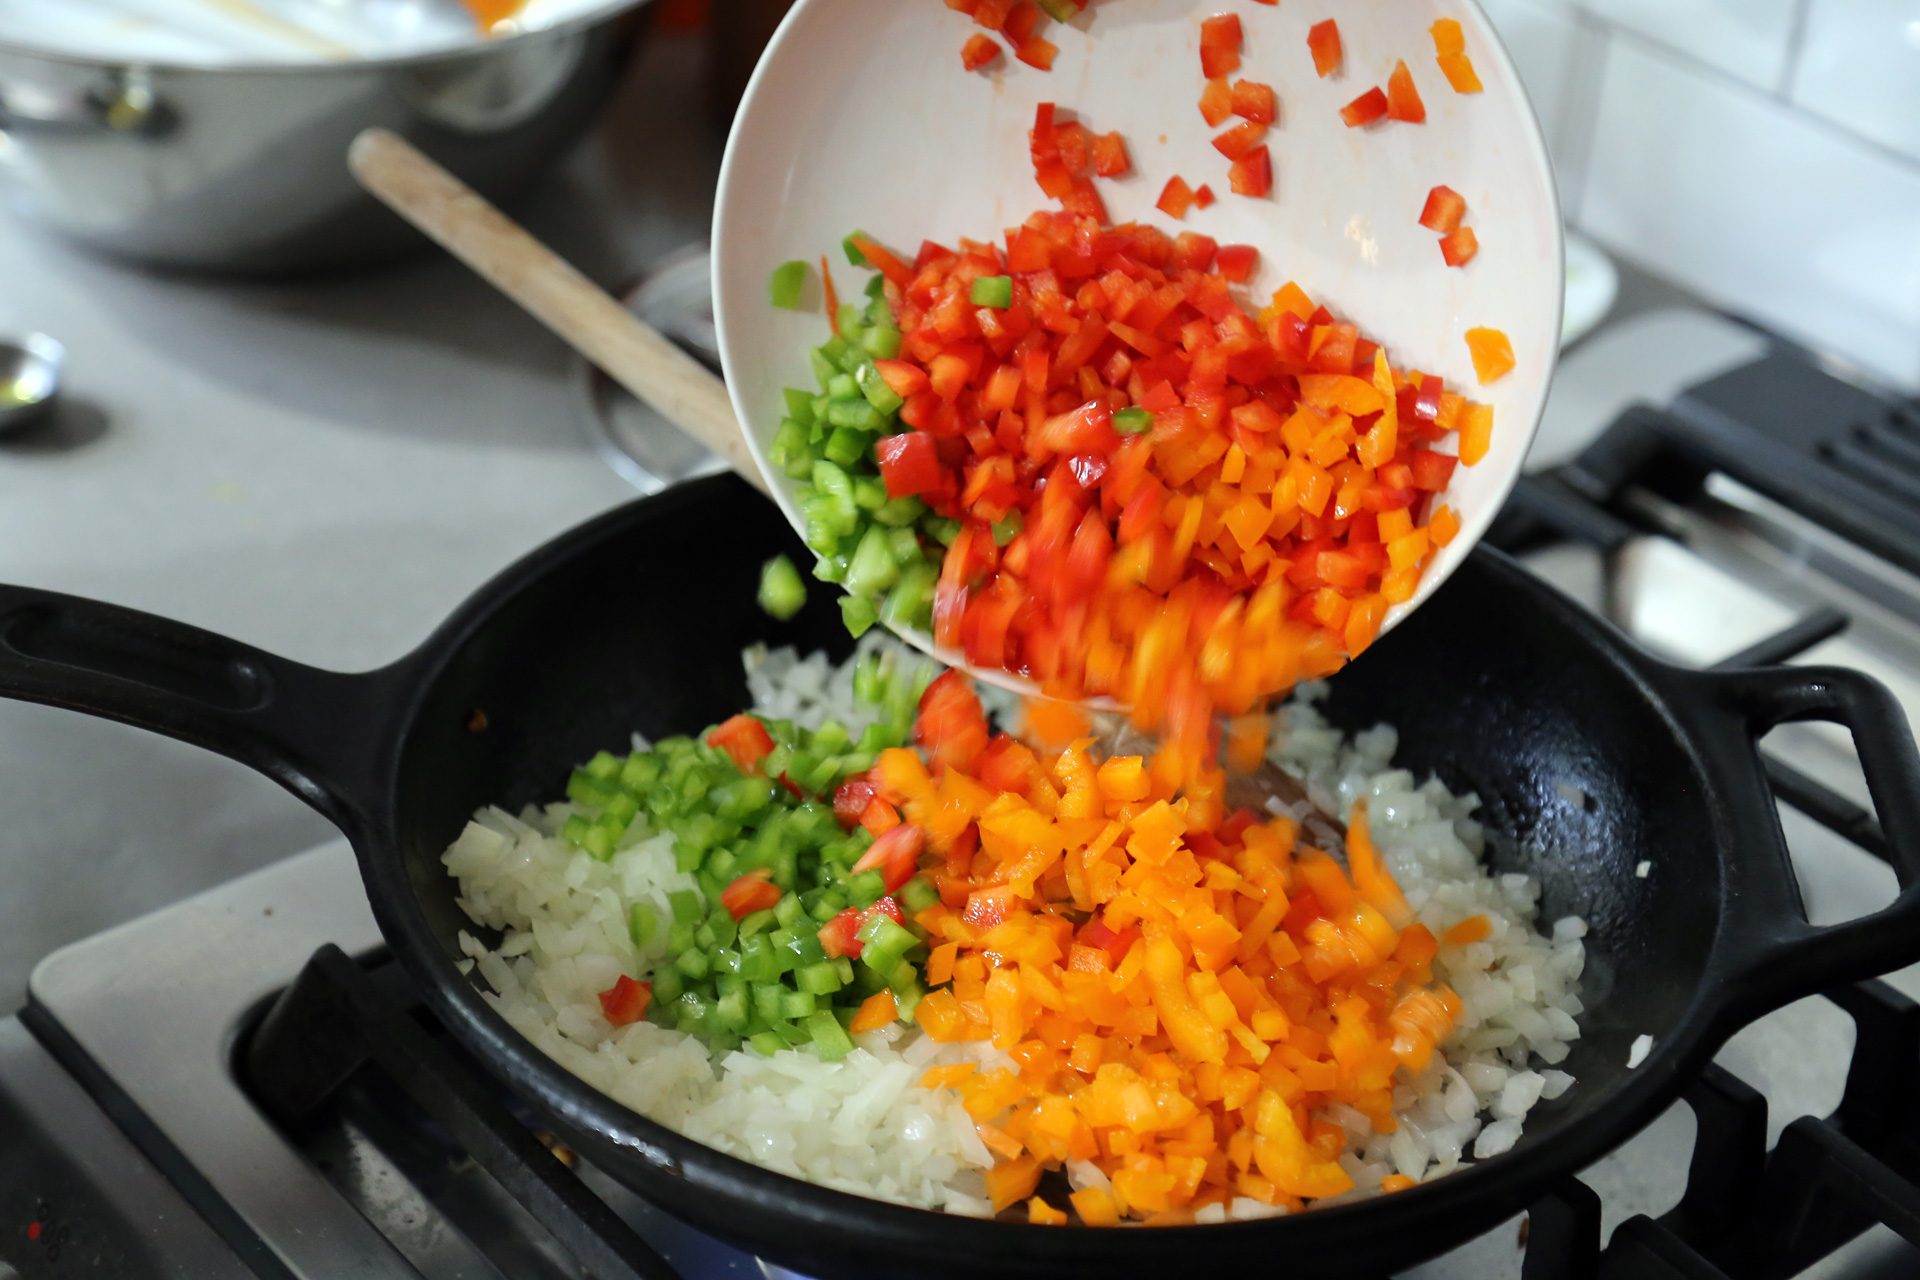 In a frying pan, warm the olive oil. Add the onion, bell peppers, oregano, and 1 teaspoon salt. 